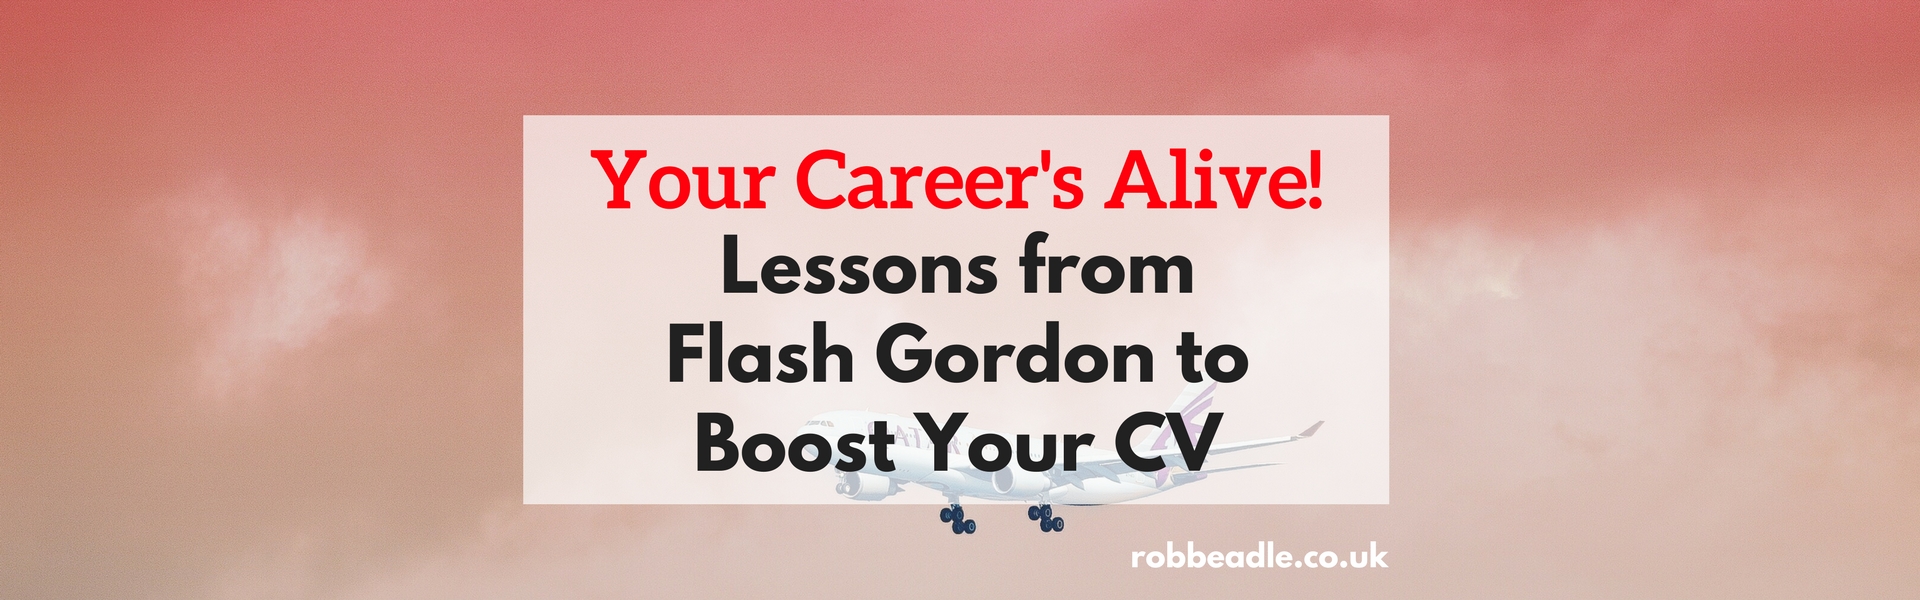 Your Career’s Alive! Lessons from Flash Gordon to Boost Your CV